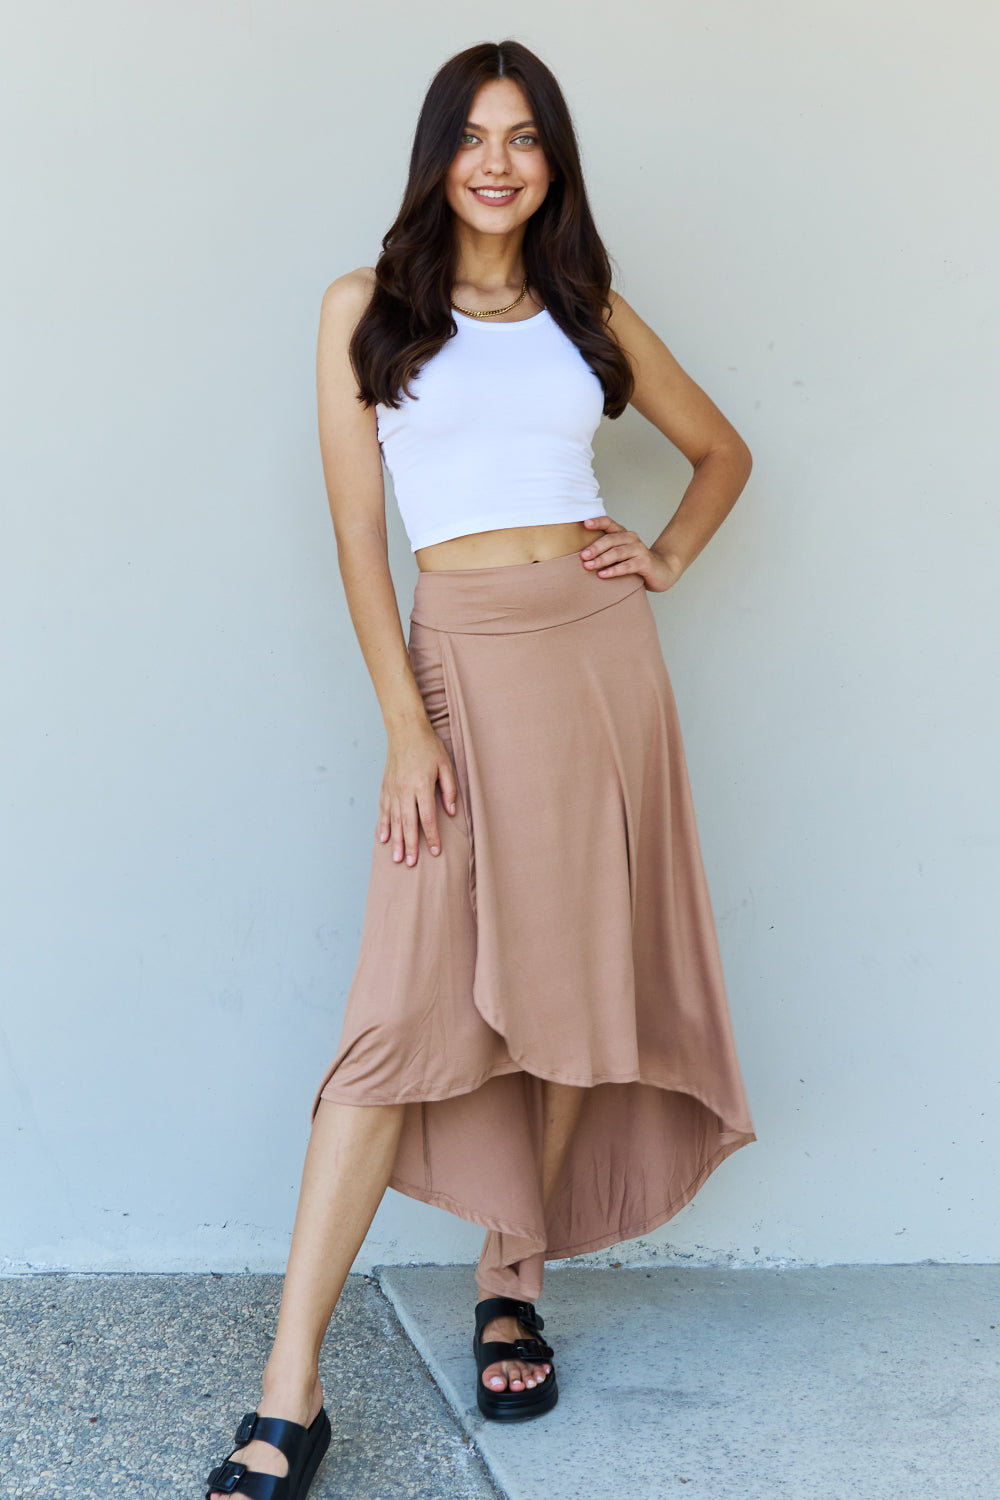 Gray Ninexis First Choice High Waisted Flare Maxi Skirt in Camel Sentient Beauty Fashions Apparel & Accessories